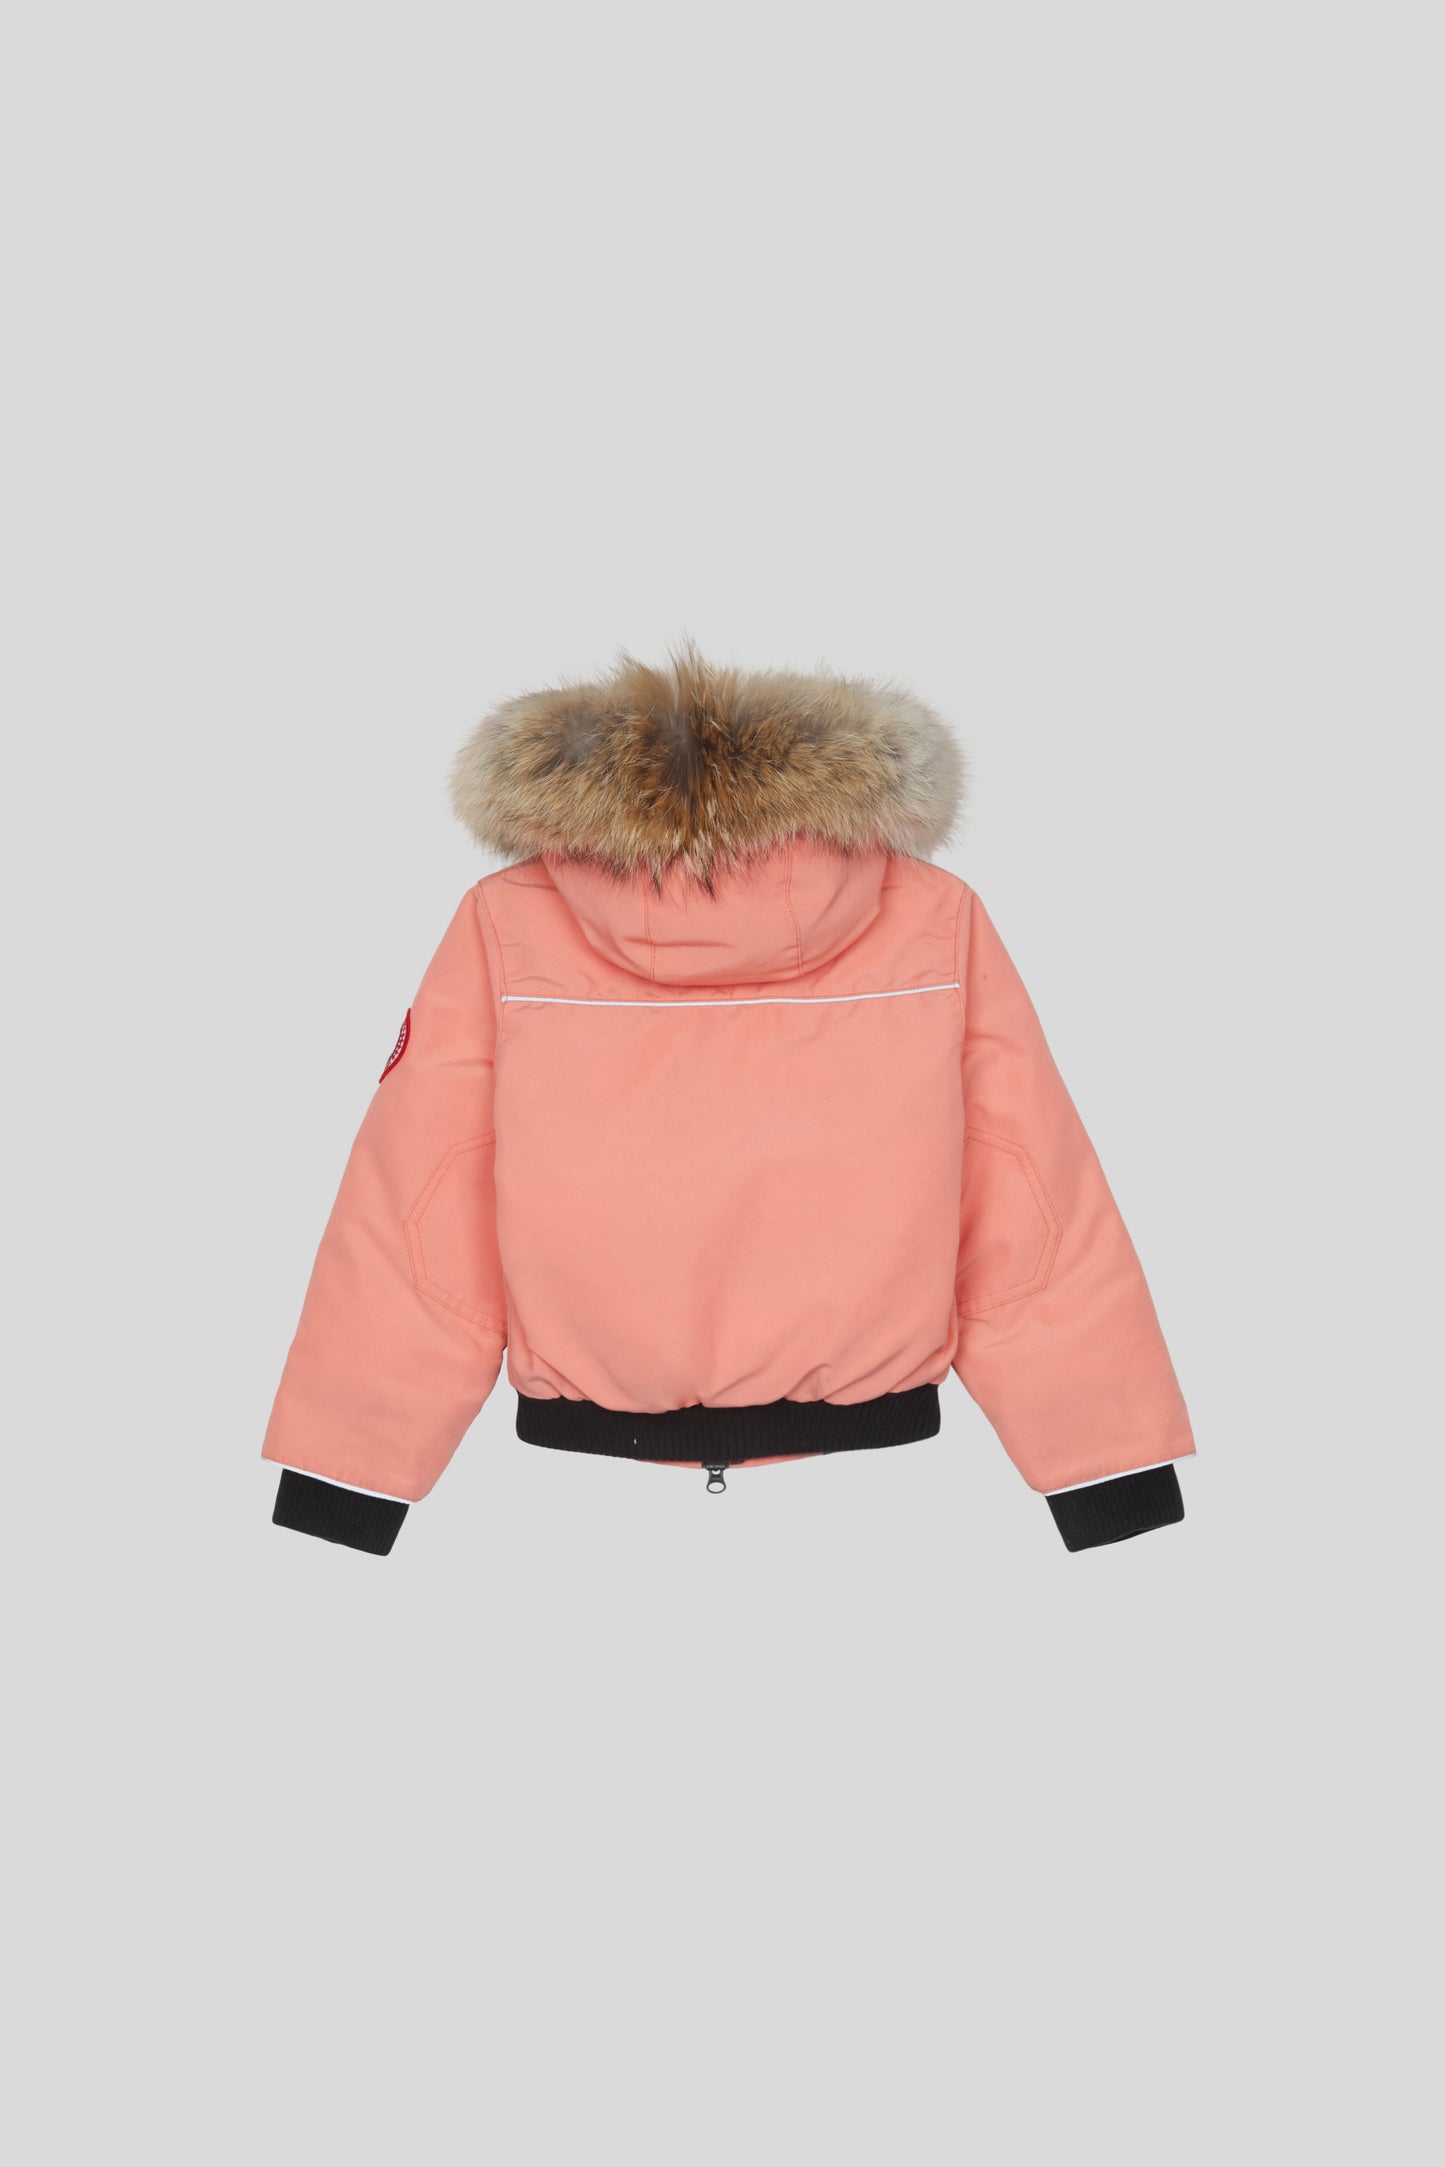 Kids Grizzly Bomber Jacket